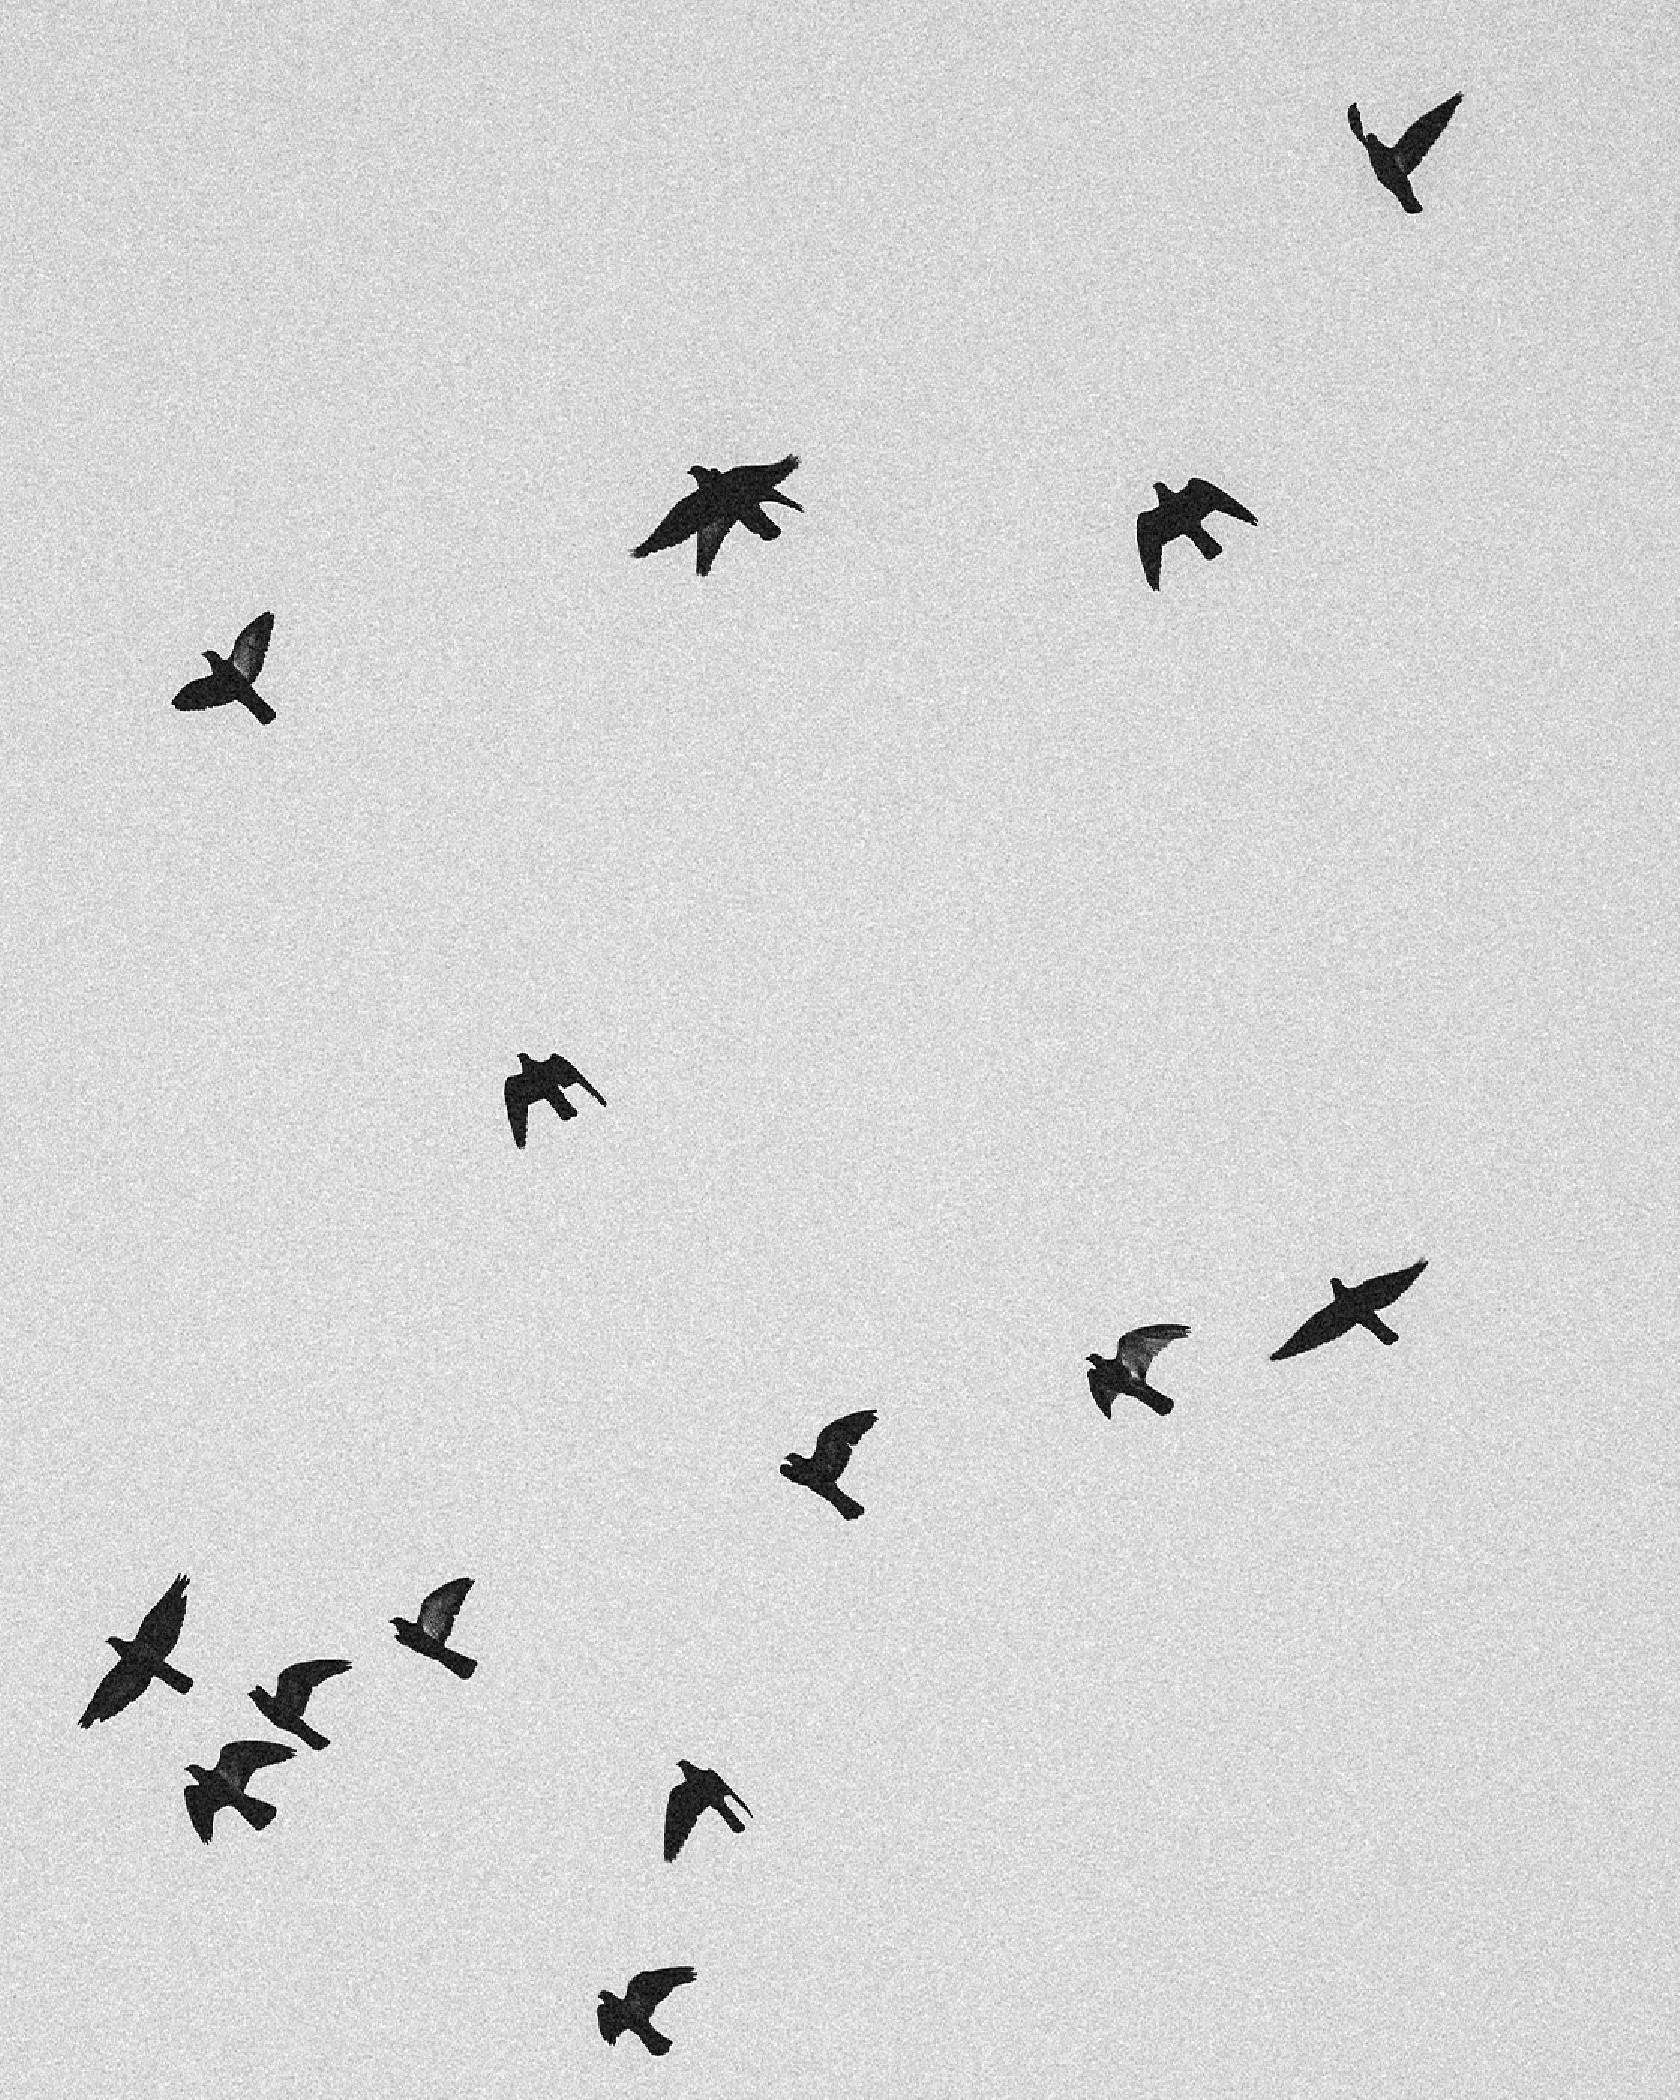 A black and white photo of birds flying in the sky.